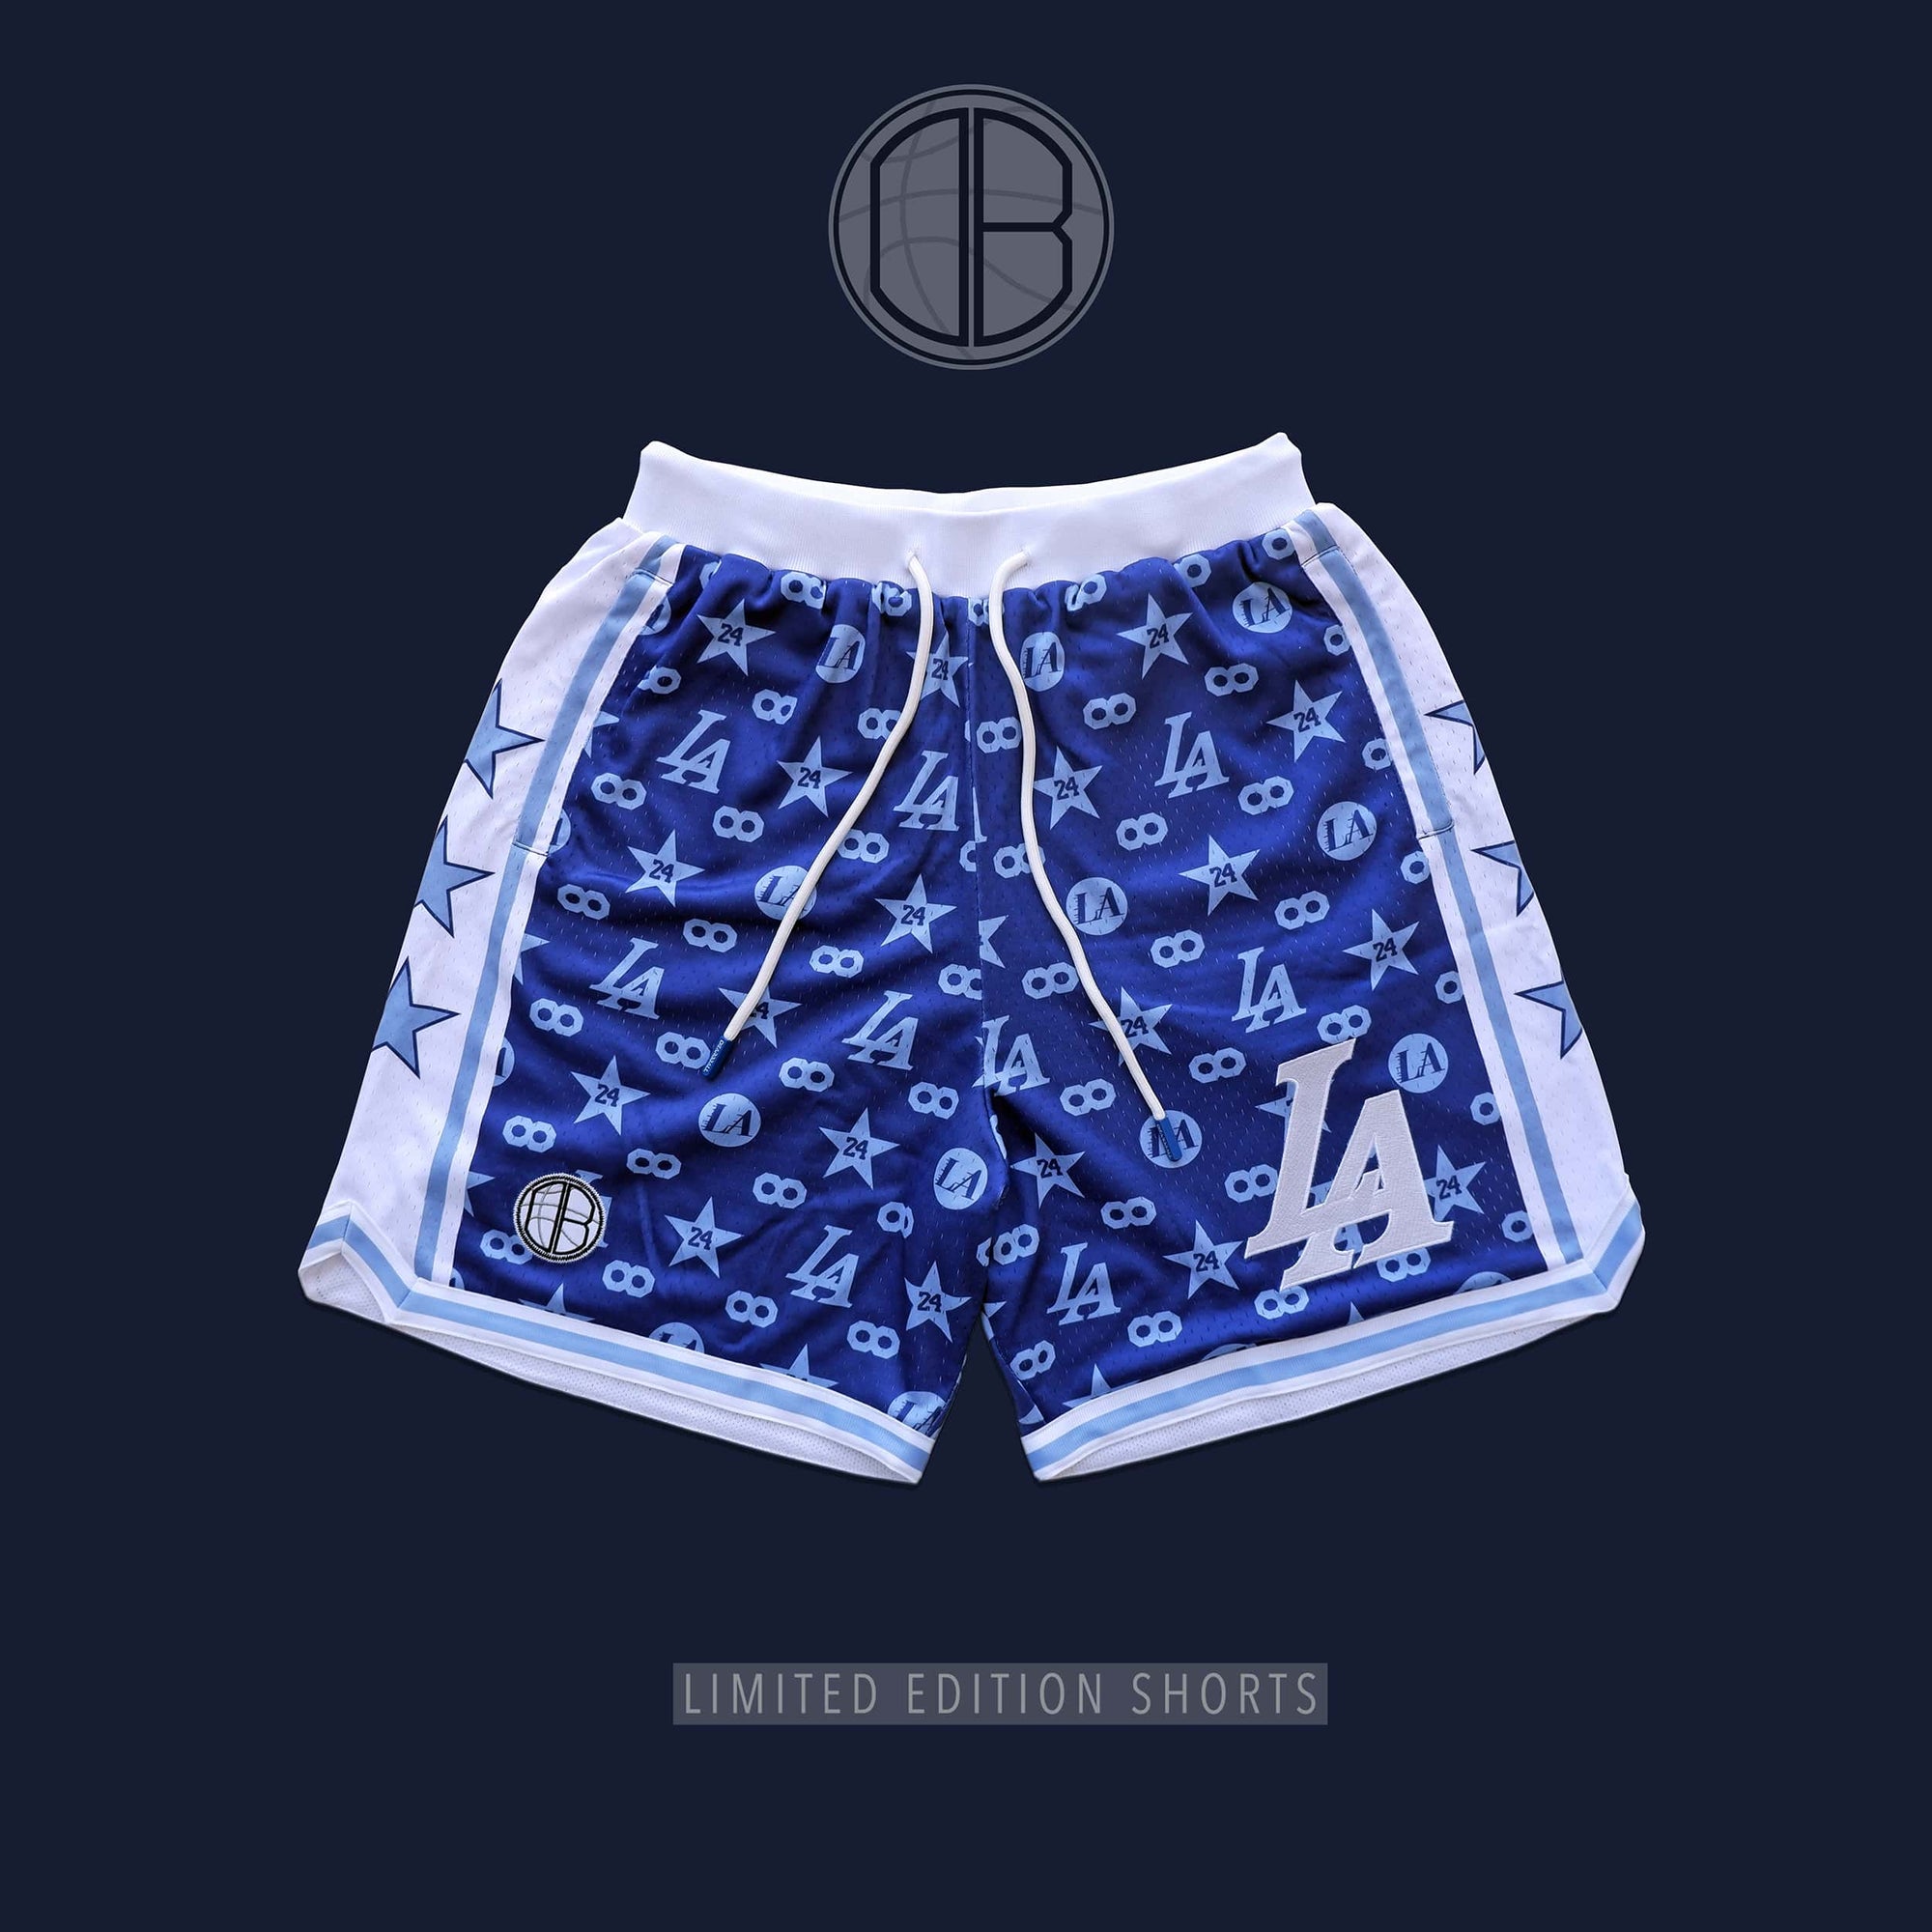 SHORTS LIMITED EDITION